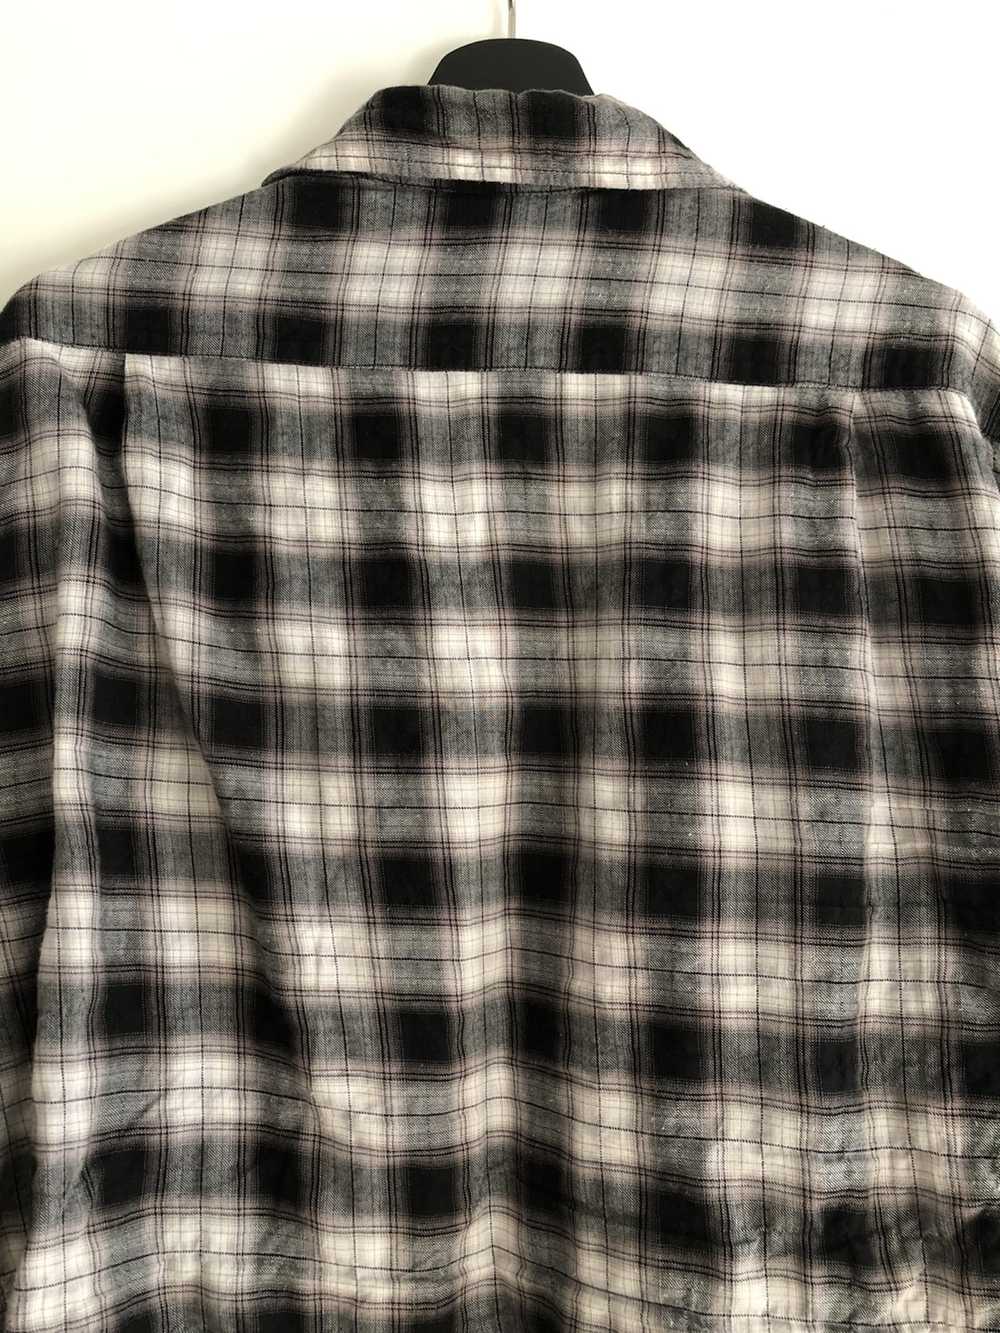 Ann Demeulemeester Archive checked Shirt - image 9